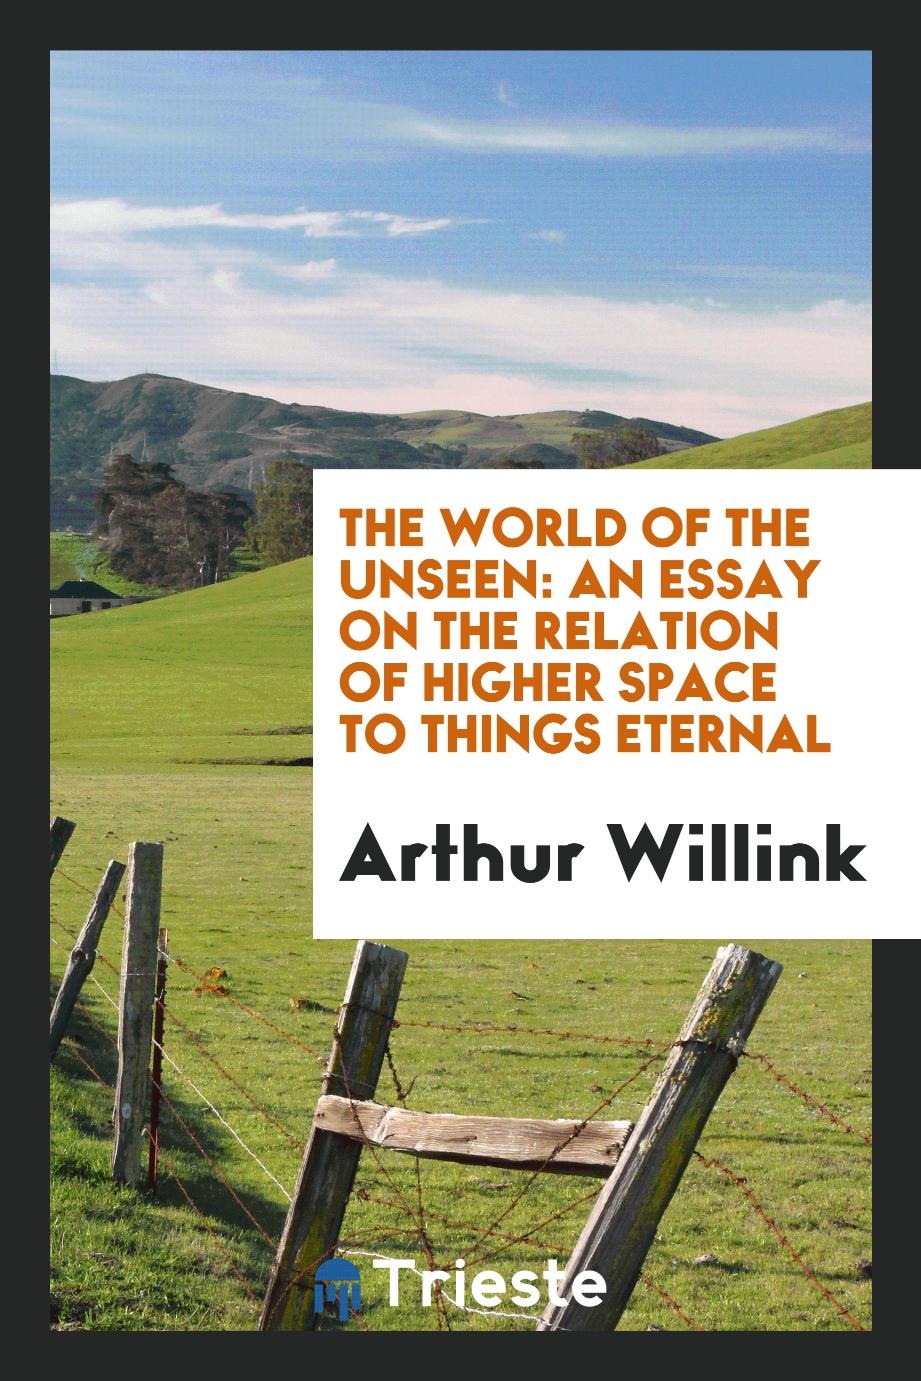 The World of the Unseen: An Essay on the Relation of Higher Space to Things Eternal